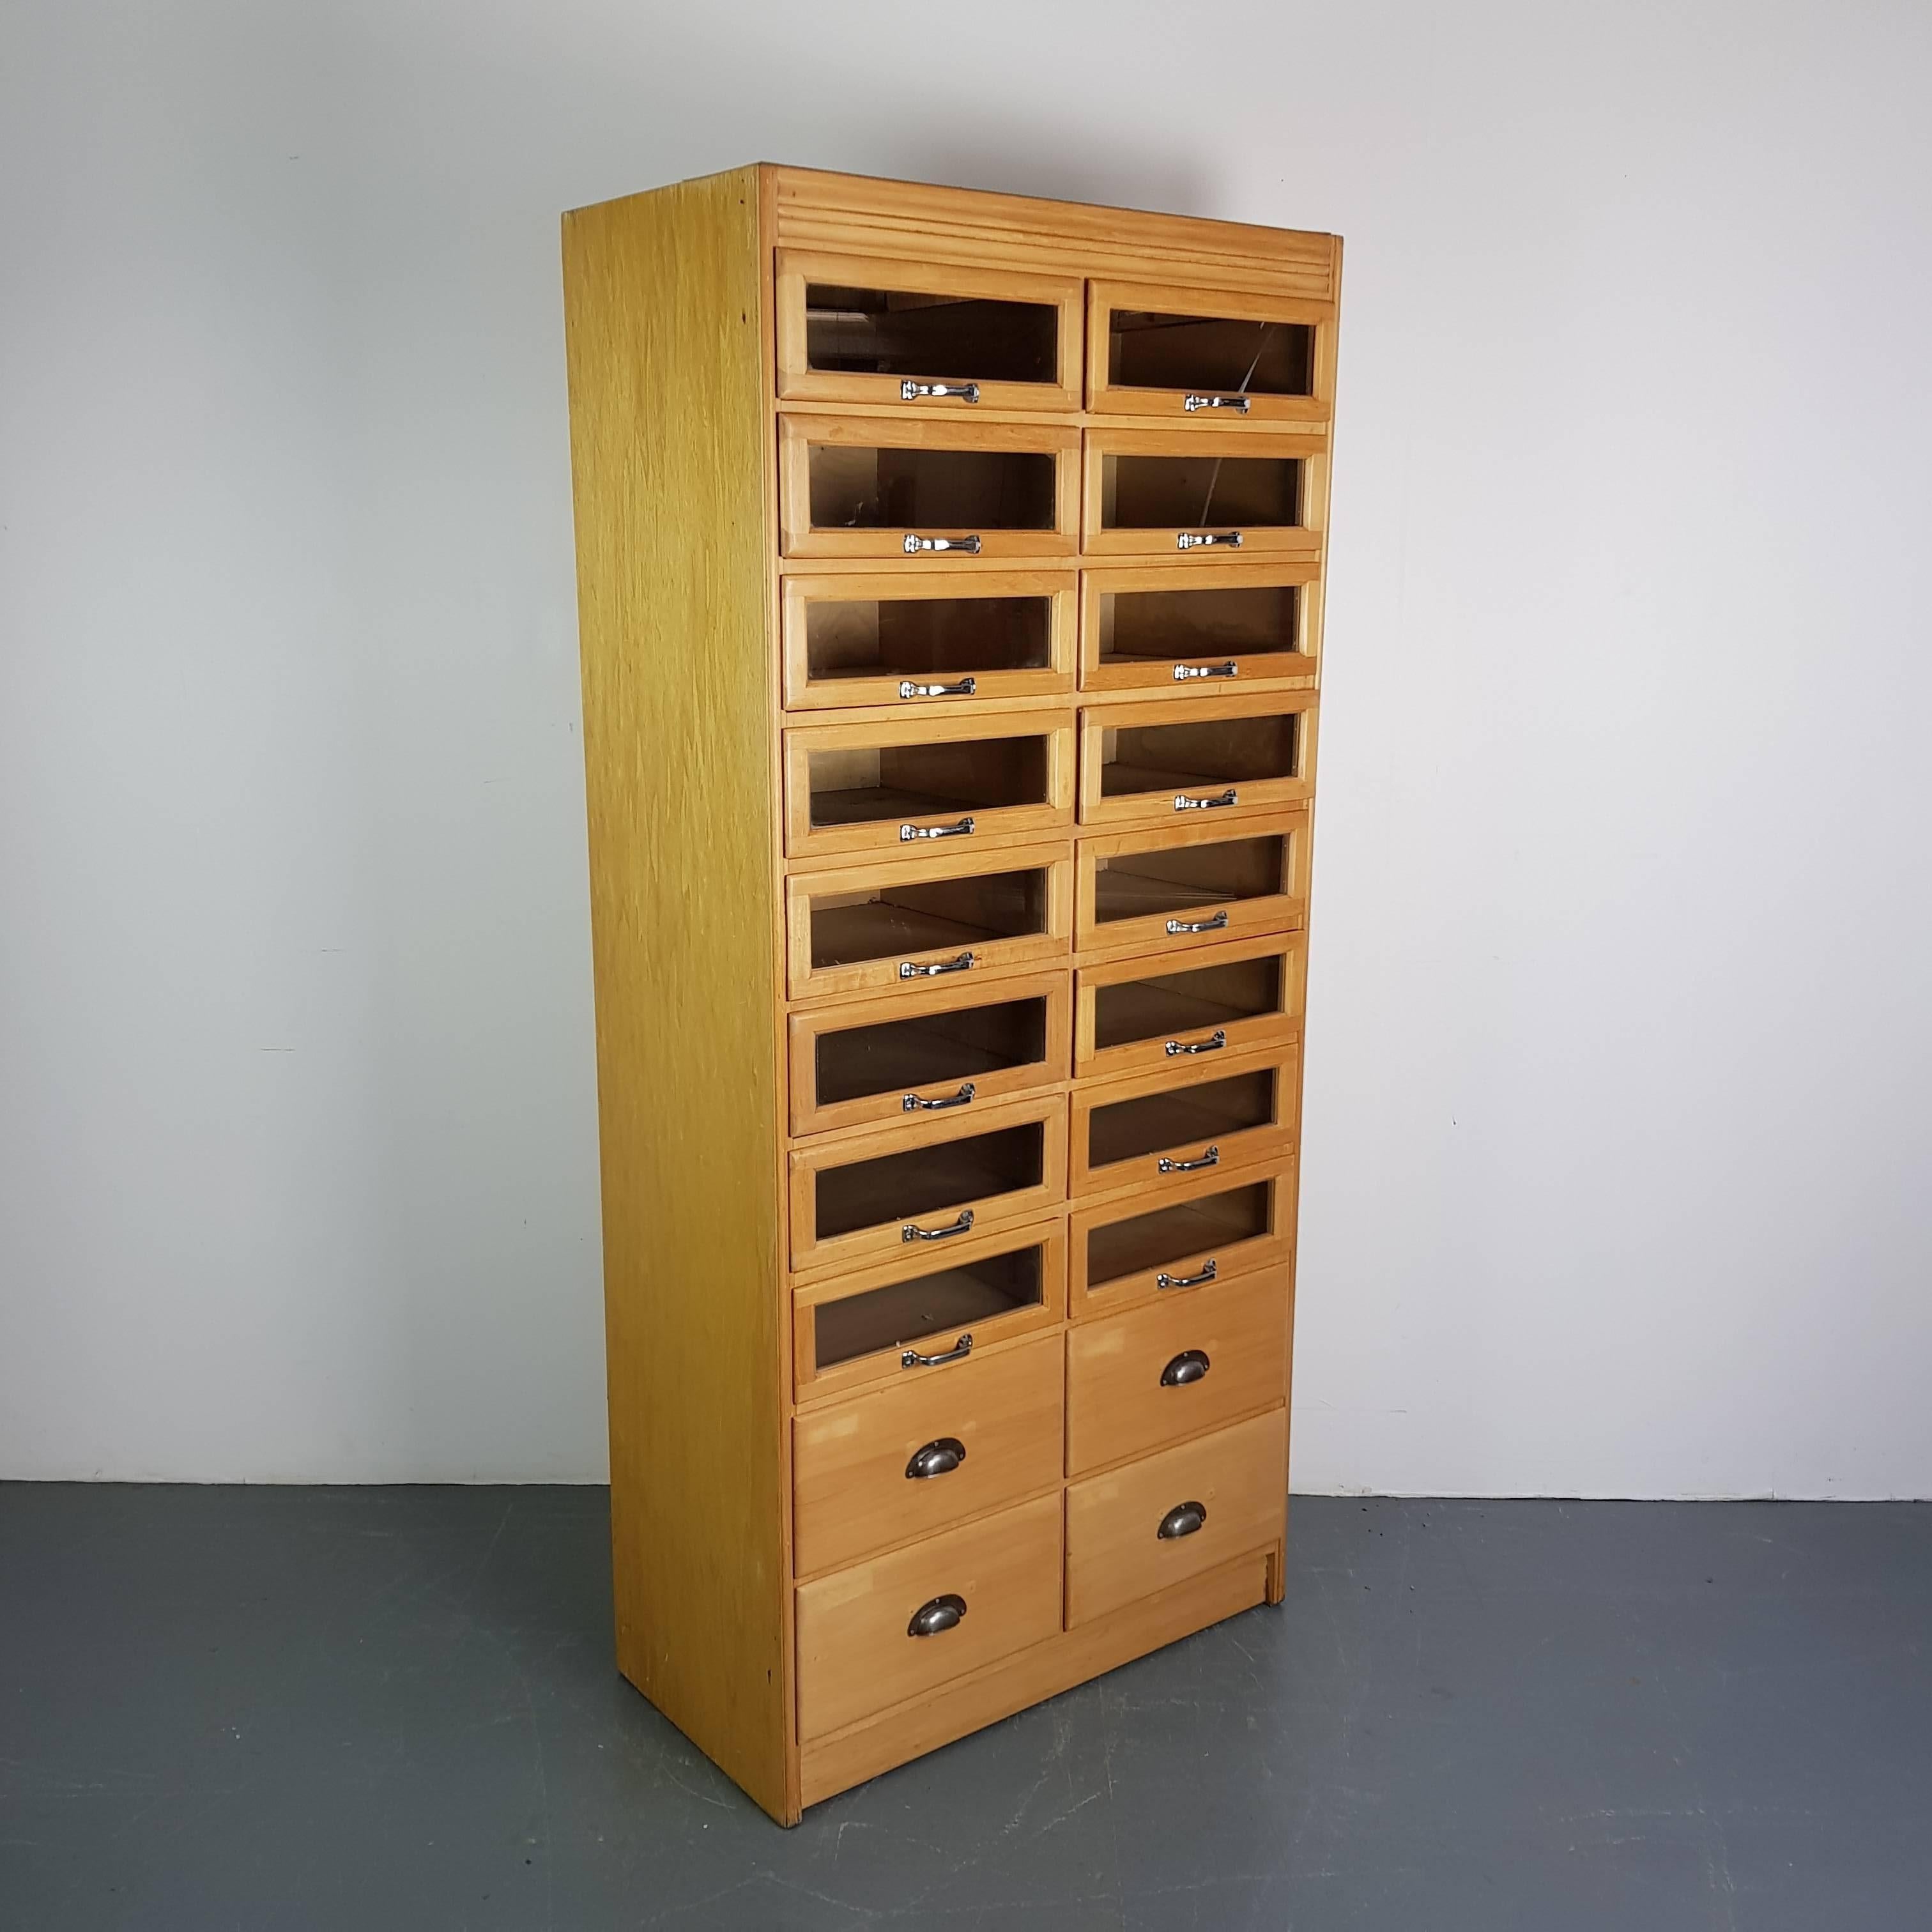 Lovely blonde wood vintage 20 drawer haberdashery shop cabinet from the first half of the last century.

In good vintage condition.  Some scuffs here and there, commensurate with age, but no specific wear to mention. Please bear in mind this has